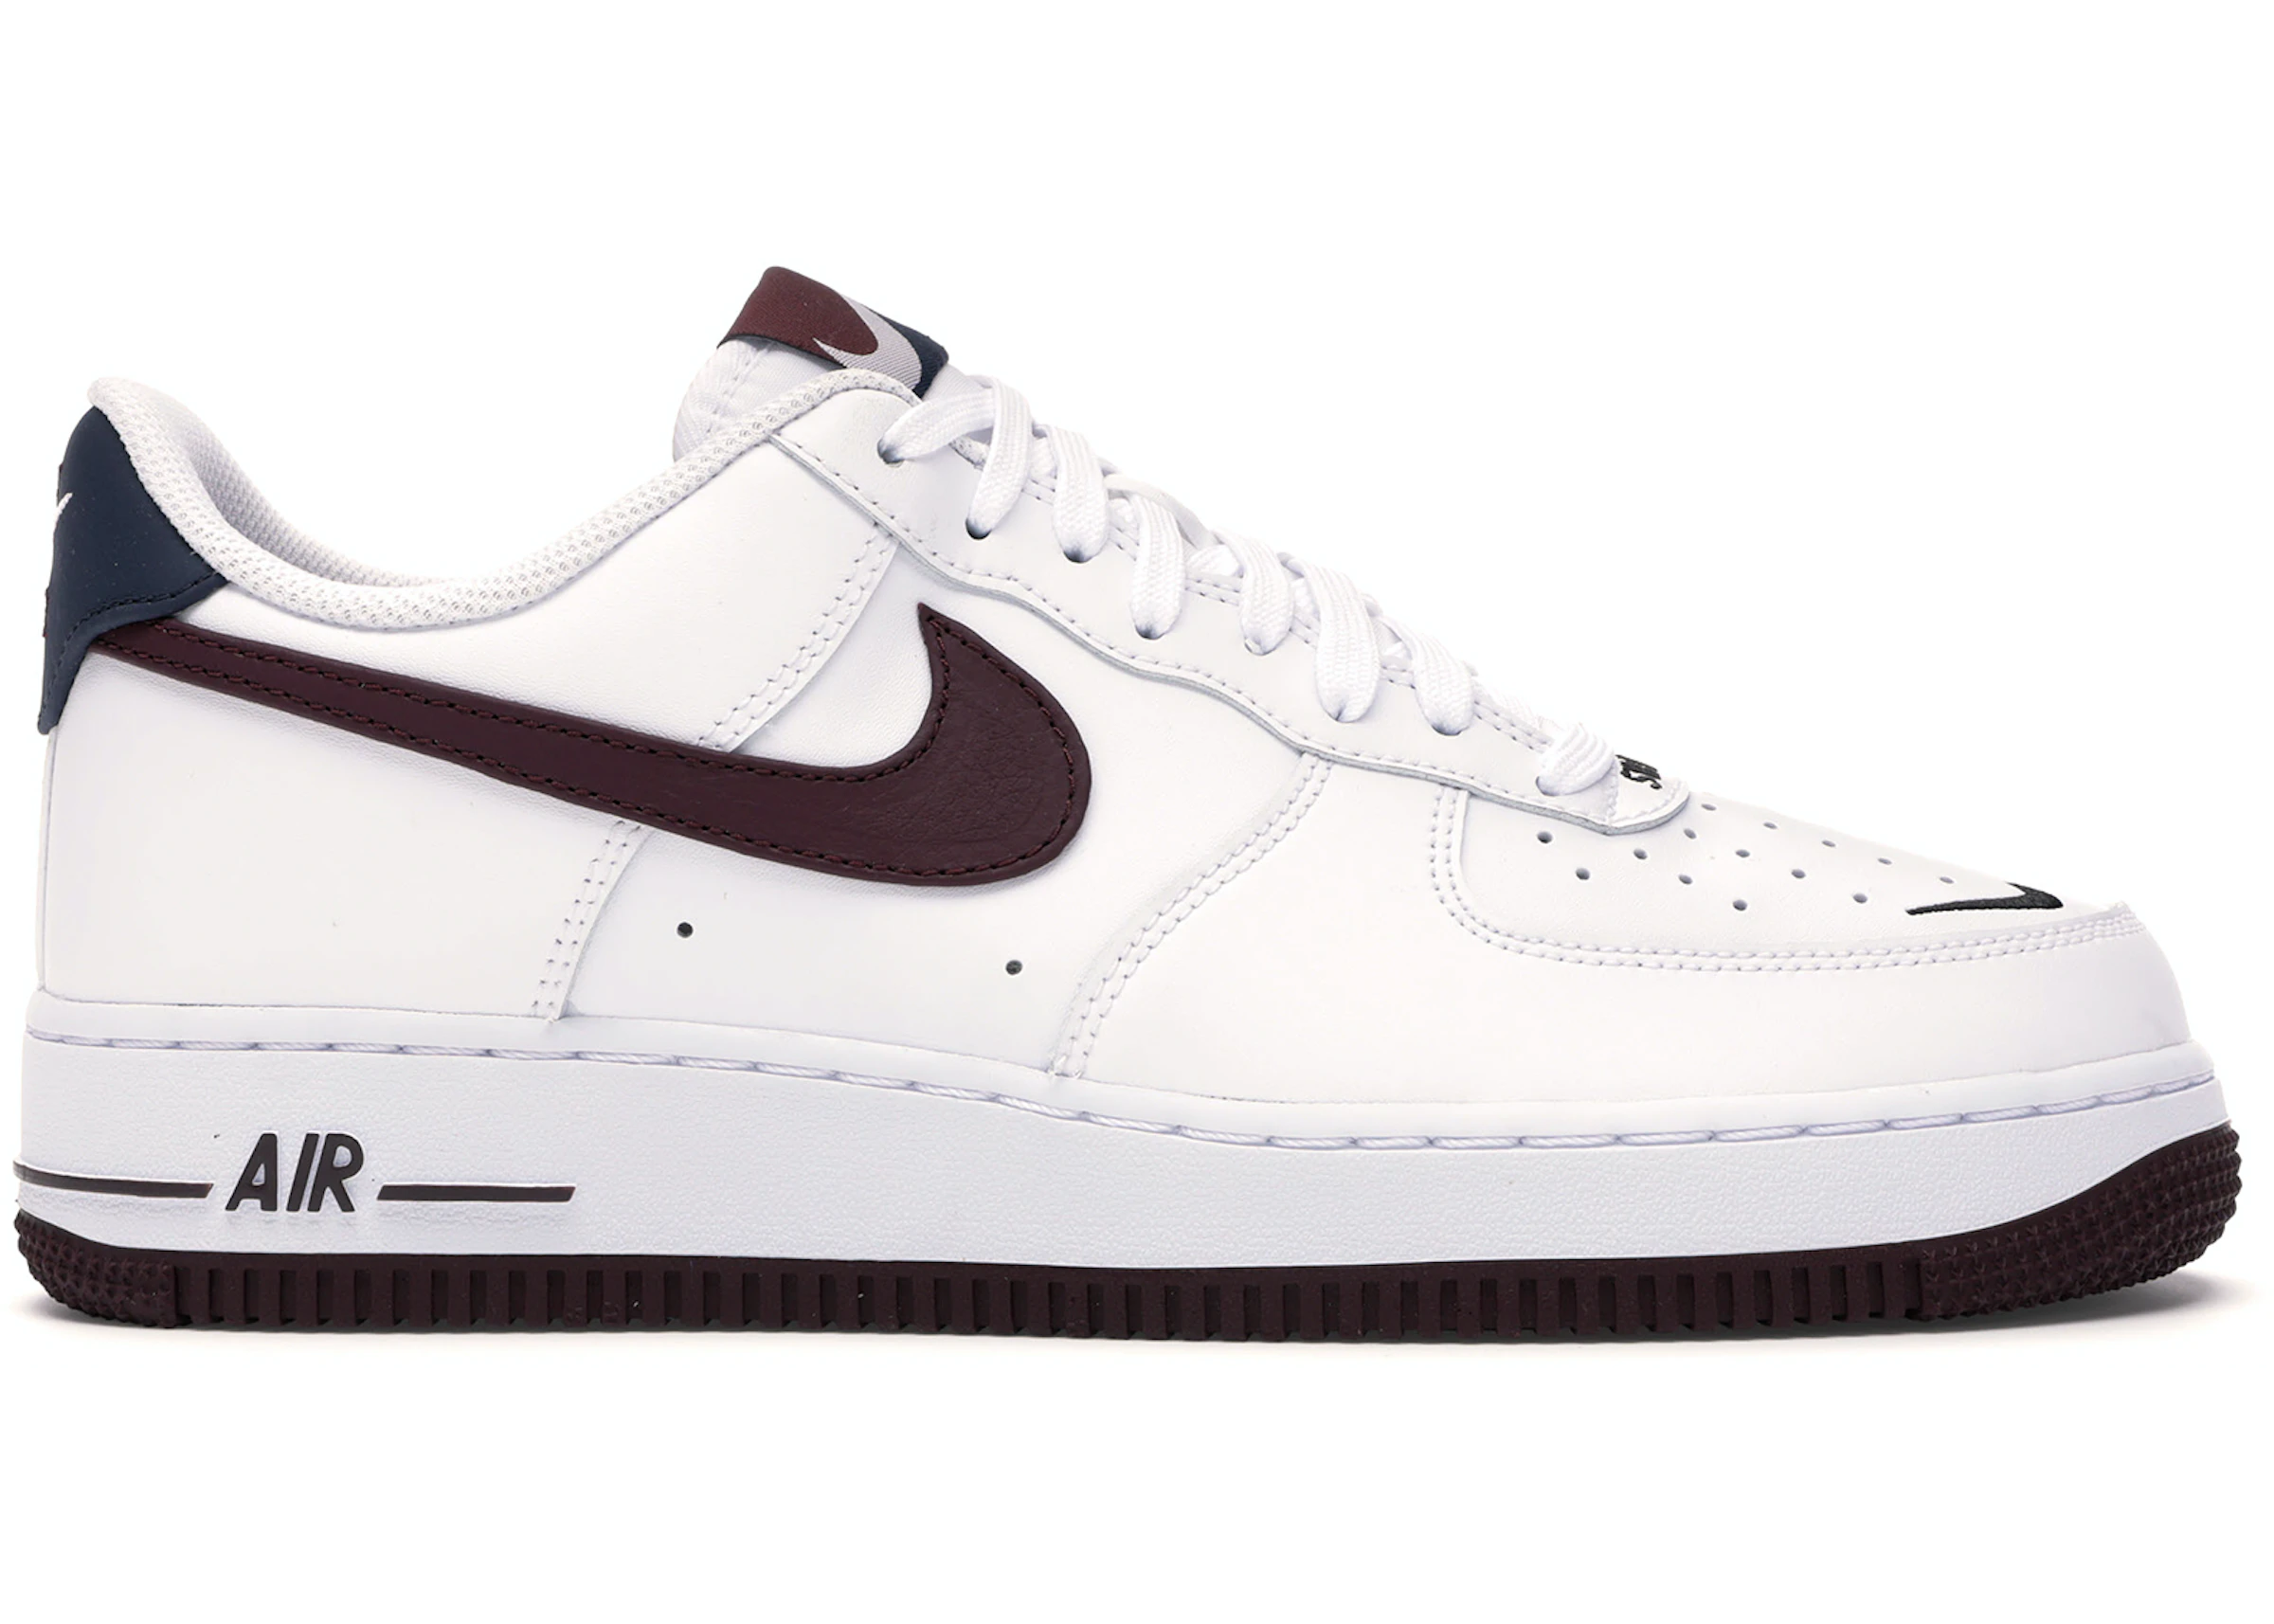 microphone charm attack Nike Air Force 1 Low Obsidian/White-University Red - CJ8731-100 - US